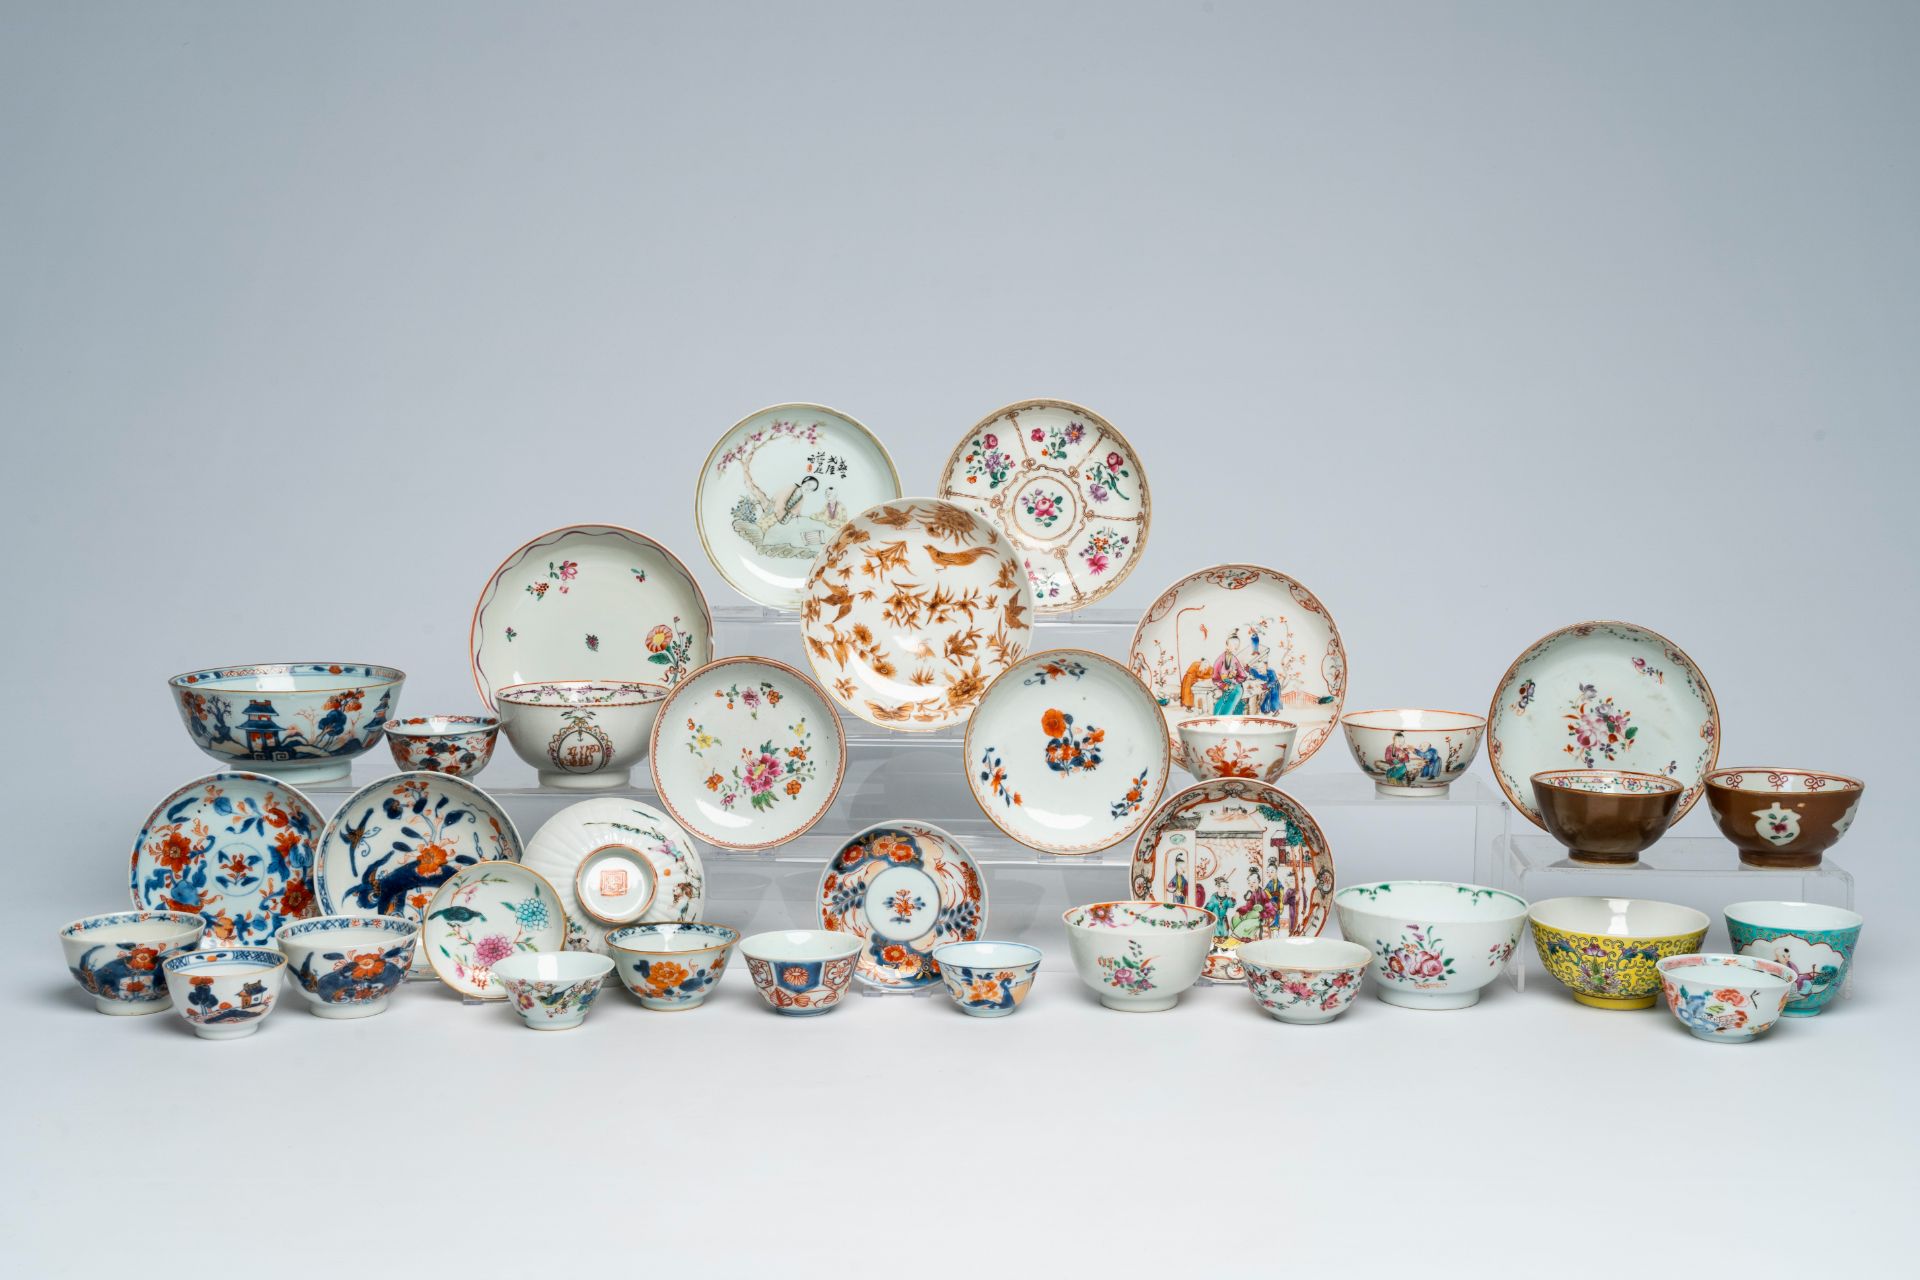 A varied collection of Chinese cups and saucers with various designs, 18th C. and later